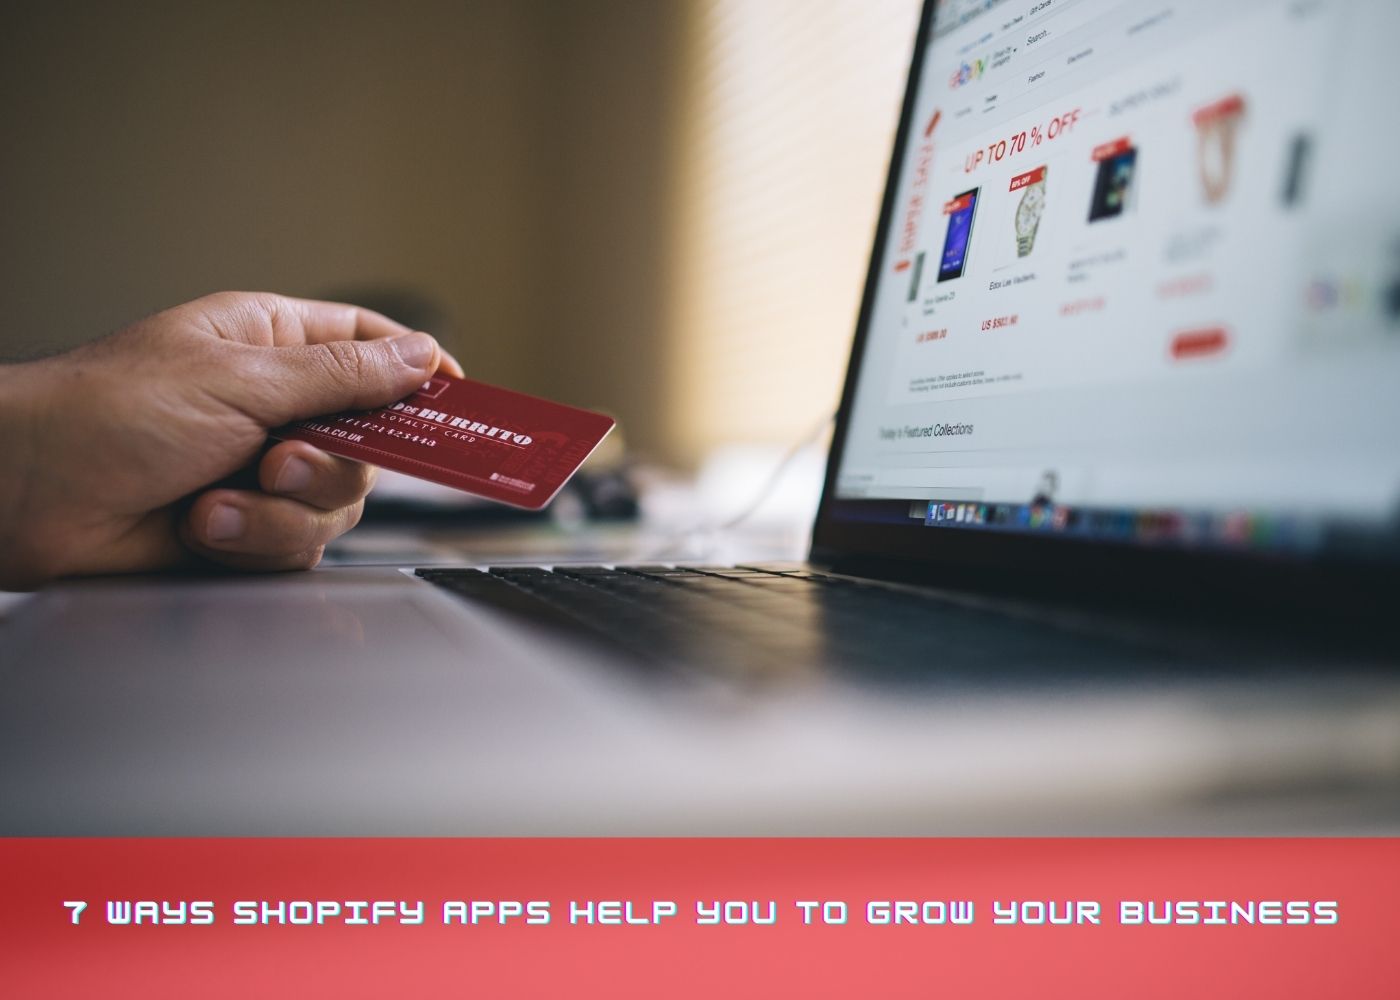 7 Ways Shopify Apps Help You to Grow Your Business